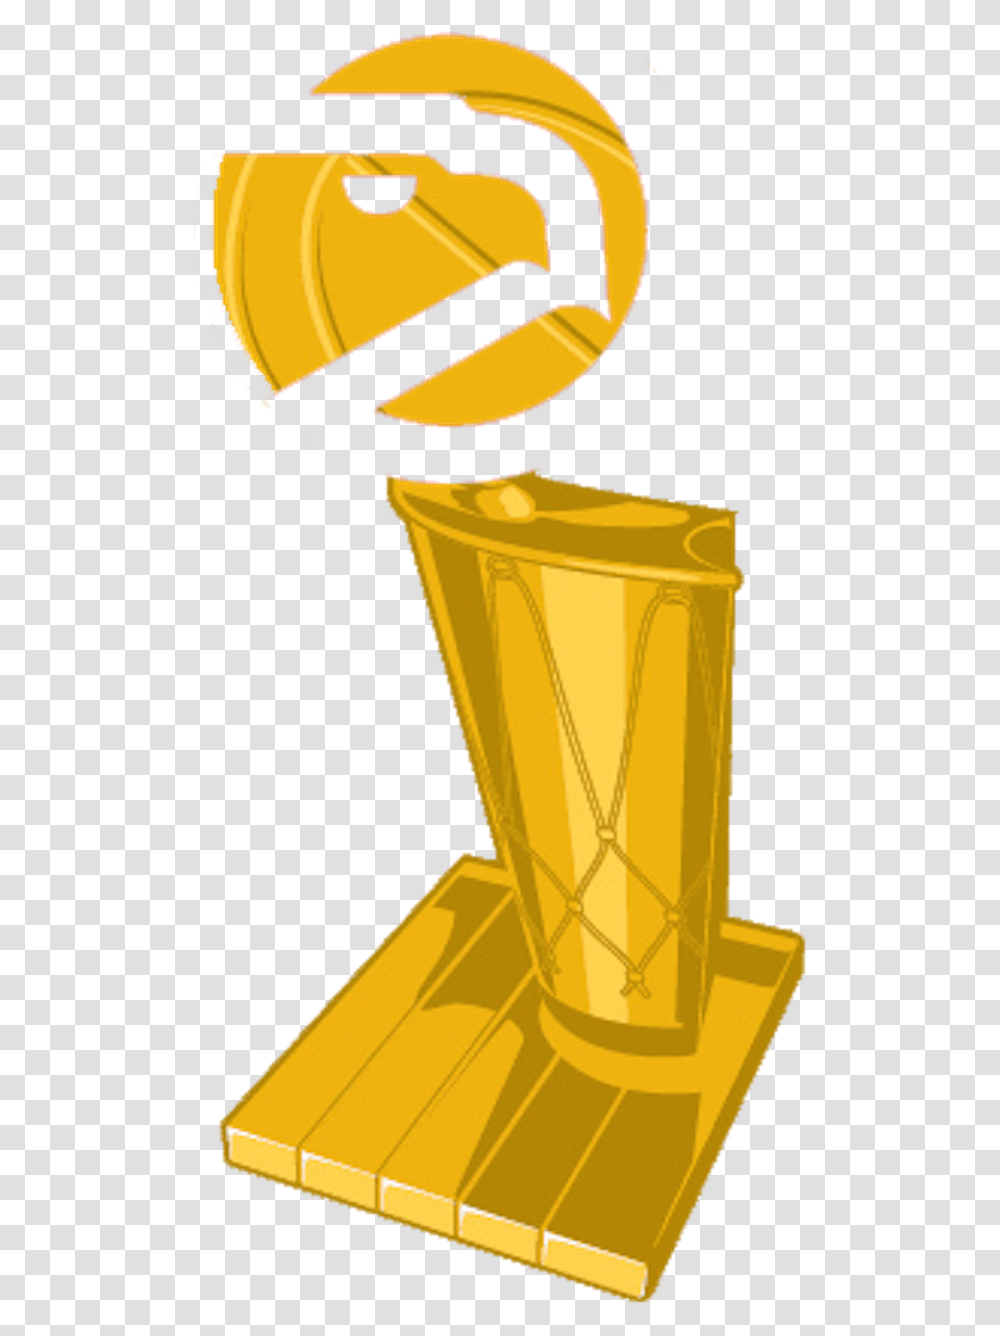 Library Of Calvalier Basketball Champ Trophy Svg Royalty Trophy Nba, Gold Transparent Png